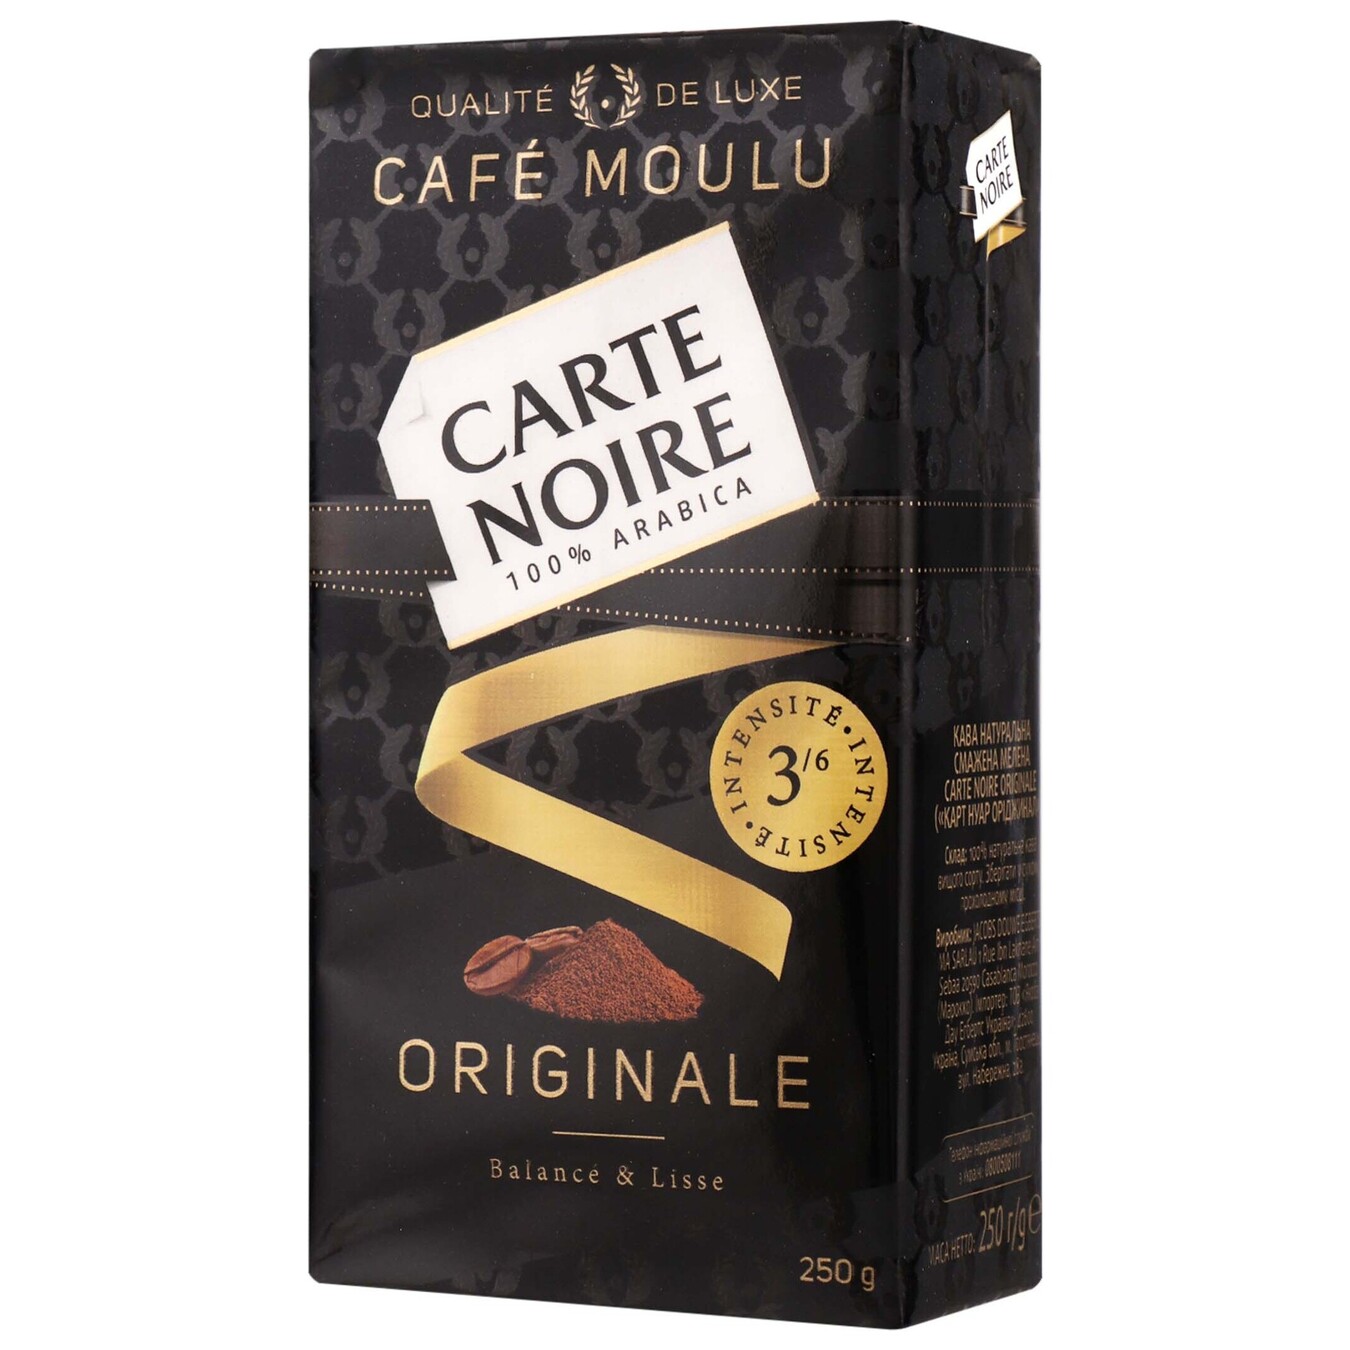 Carte Noire Originale natural roasted ground coffee 250g 2